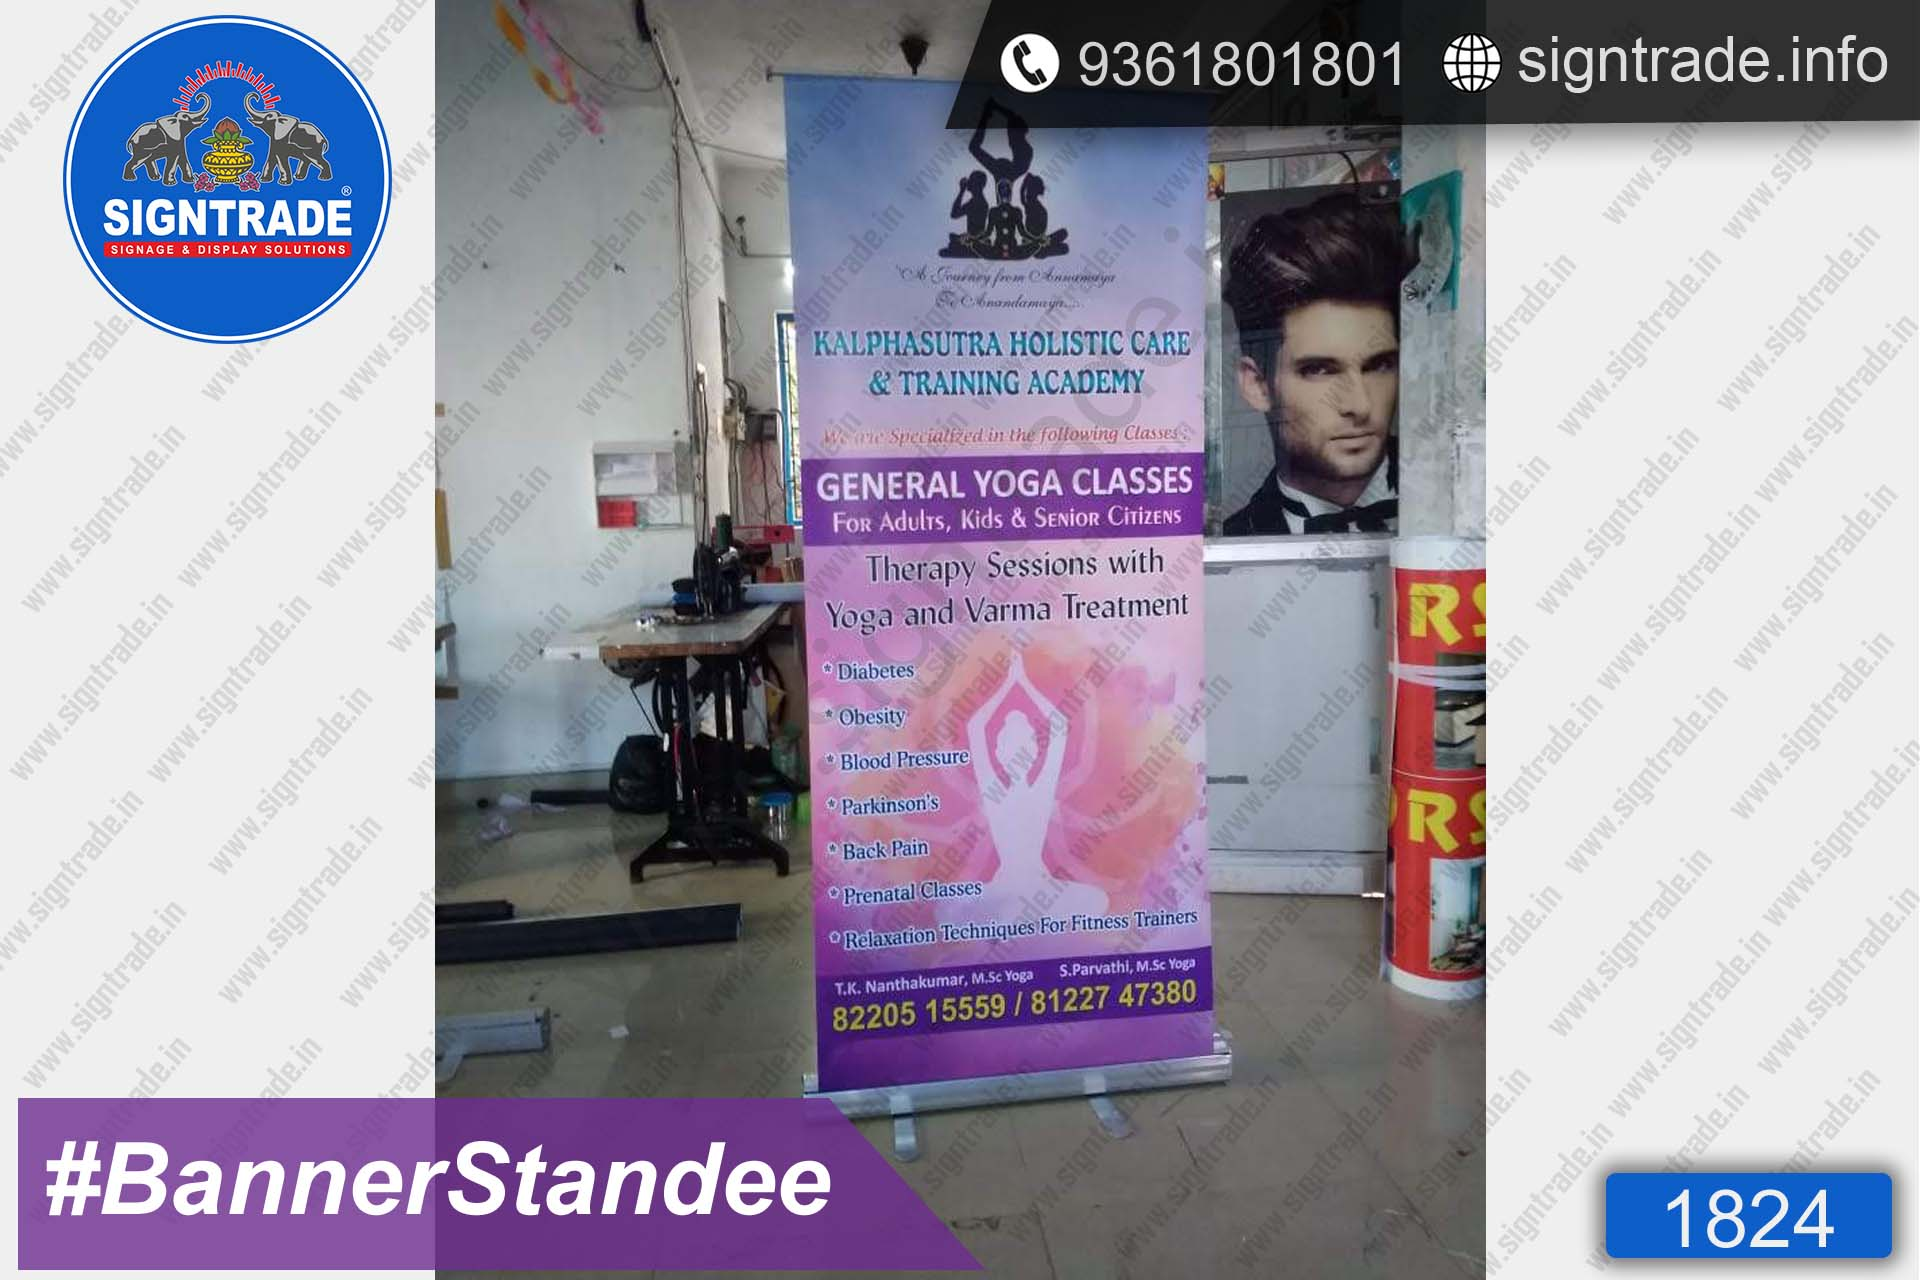 kalphasutra holistic care and training academy banner standee